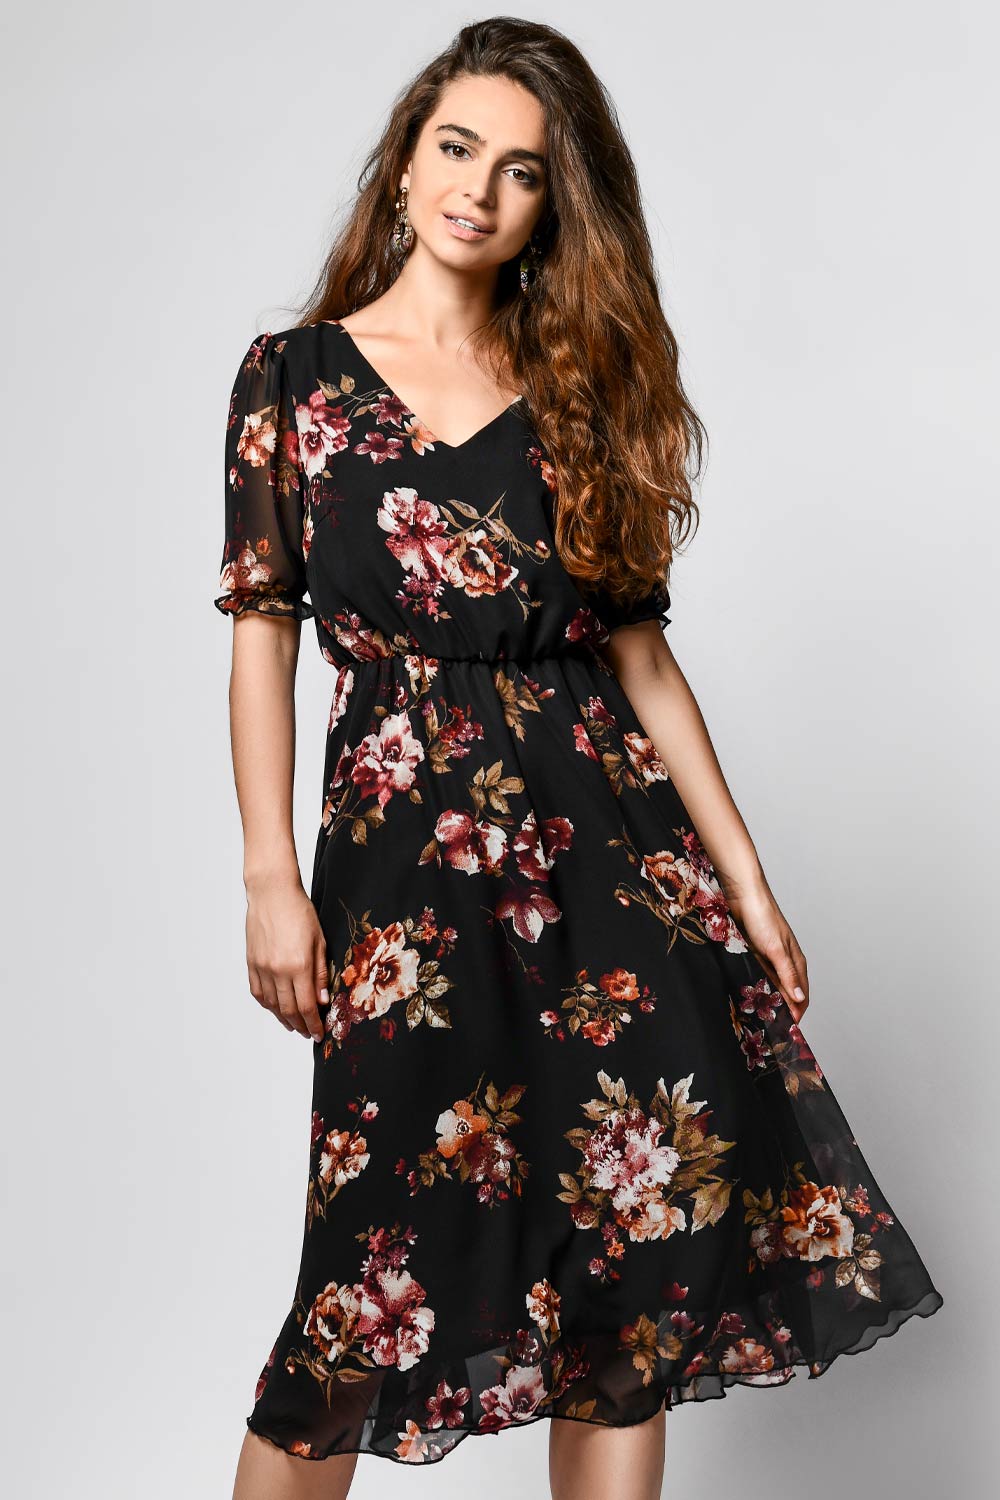 Floral Dresses: It Is Time You Dress to Impress | Glaminati.com